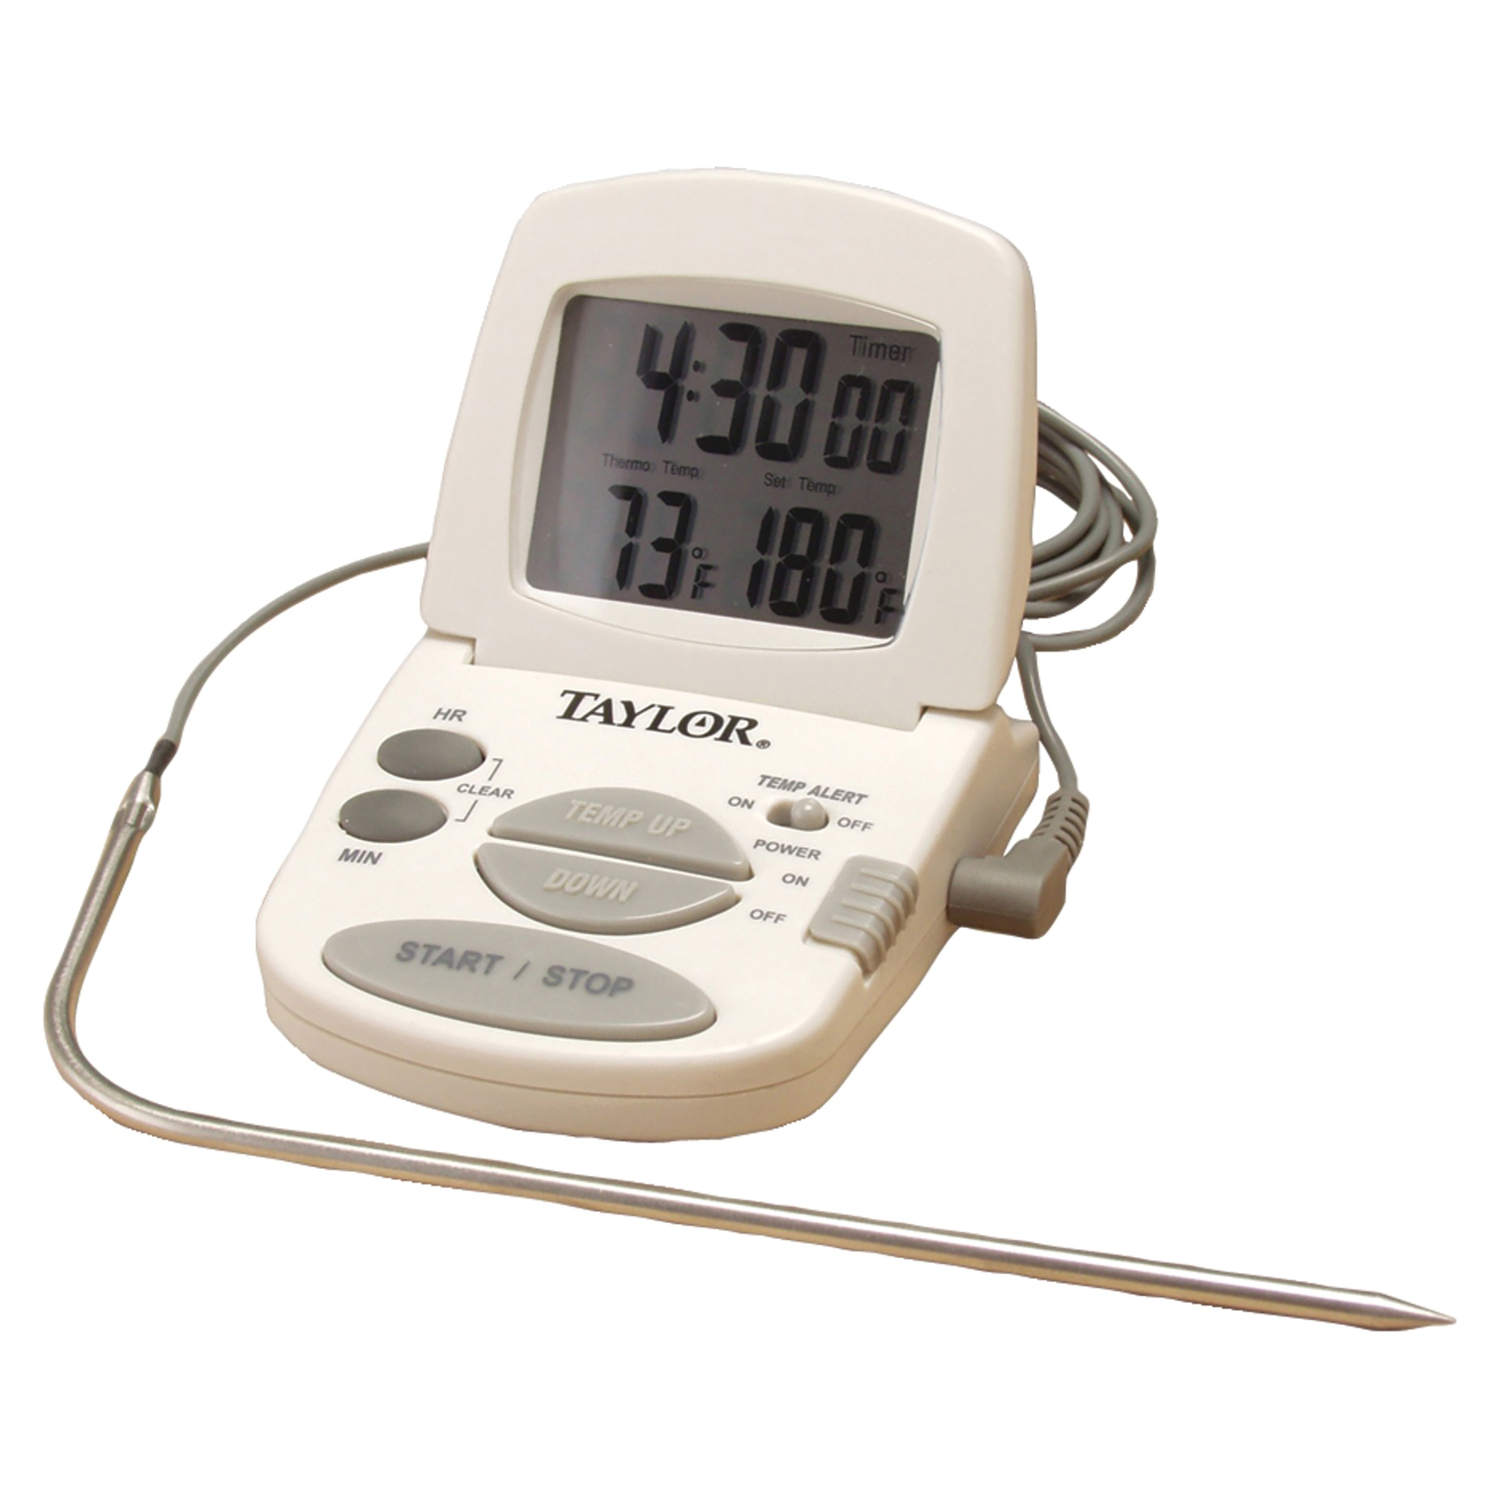 Taylor 1470n Digital Cooking Thermometer/timer